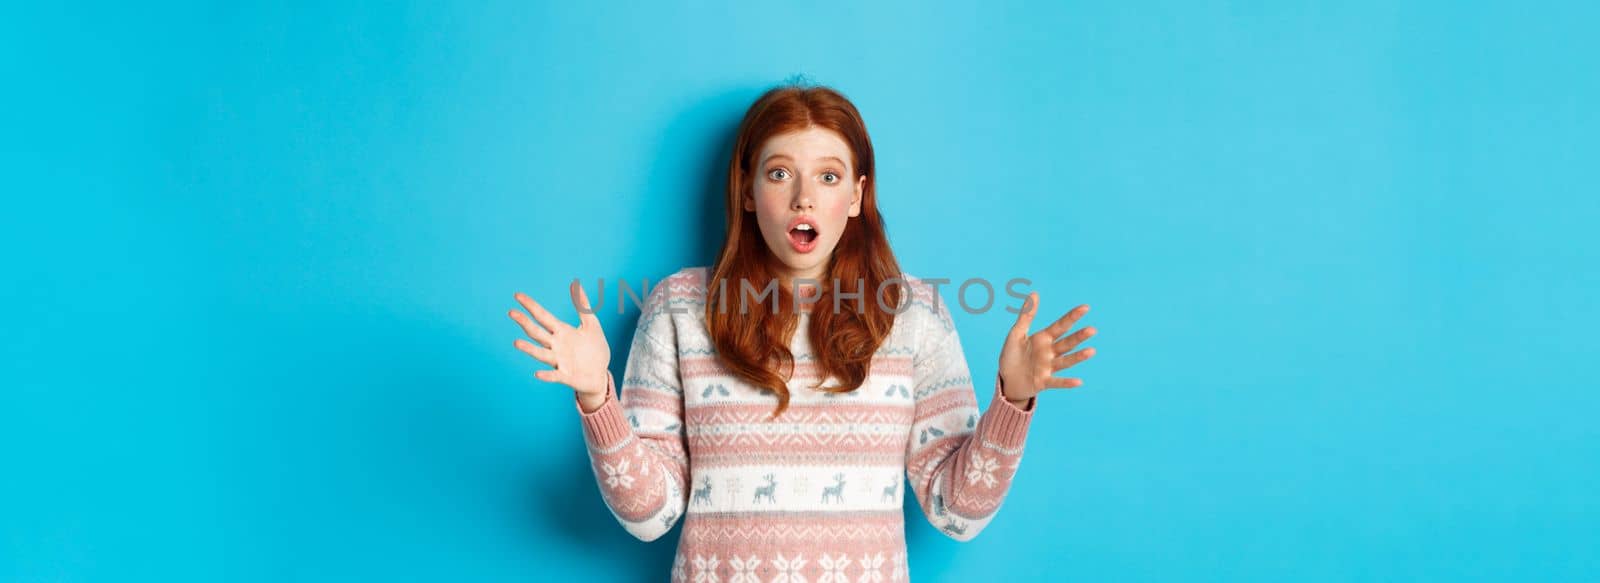 Image of startled redhead woman staring at camera with hands spread sideways, catching something, standing in winter sweater against blue background.